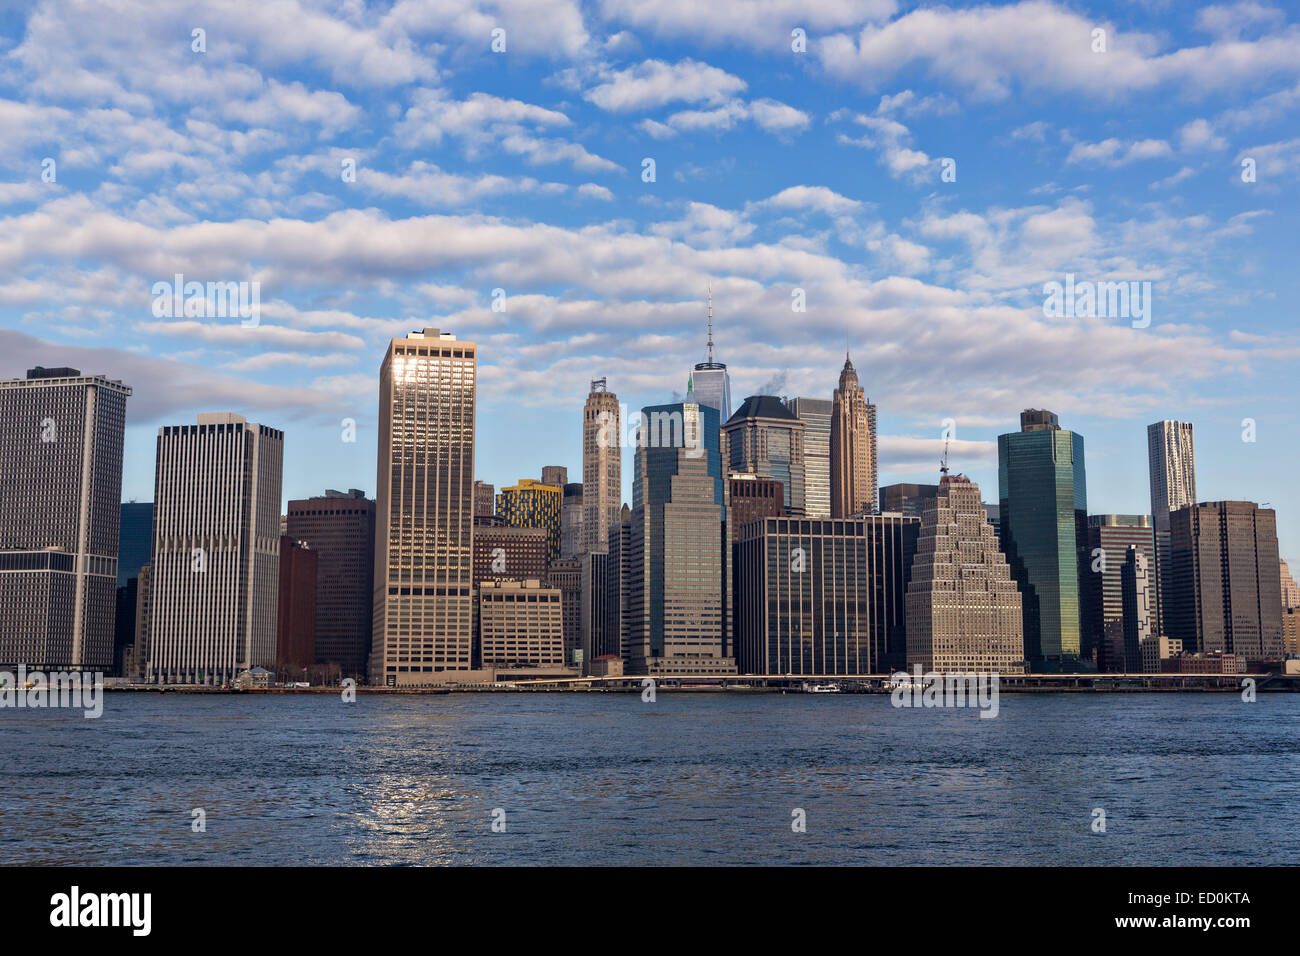 Lower Manhattan skyline viewed from the Brooklyn Bridge park across the East River December 17, 2014 in Brooklyn, NY. Stock Photo